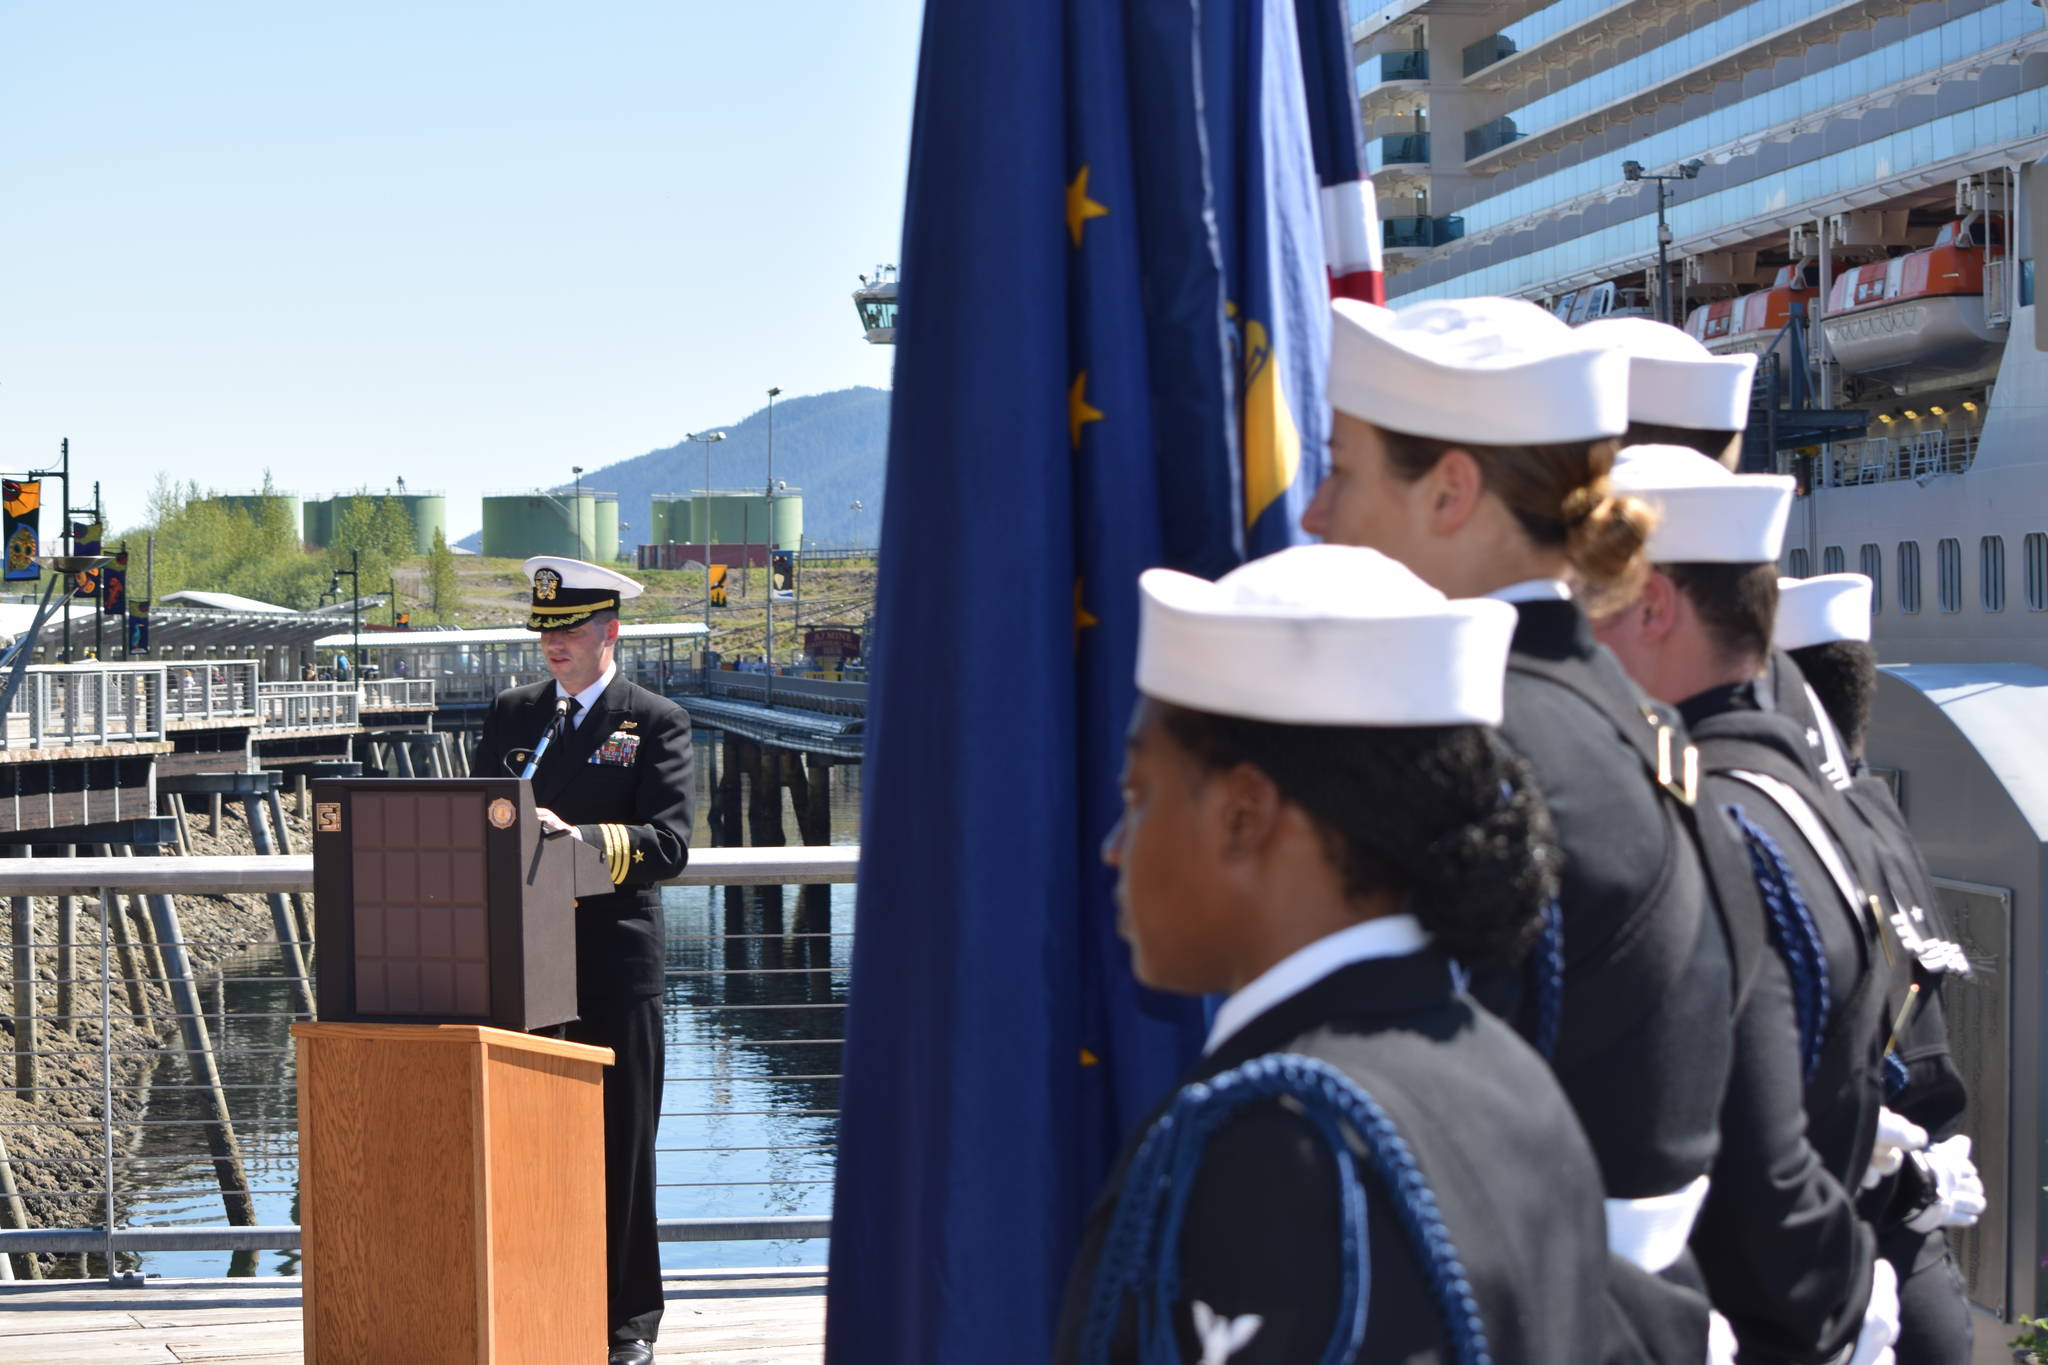 U.S.S. Commanding Officer Colby Sherwood speaks at the laying of the wreath for the U.S.S. Juneau. The vessel’s 1942 sinking was commemorated Wednesday in downtown Juneau. (Kevin Gullufsen | Juneau Empire)